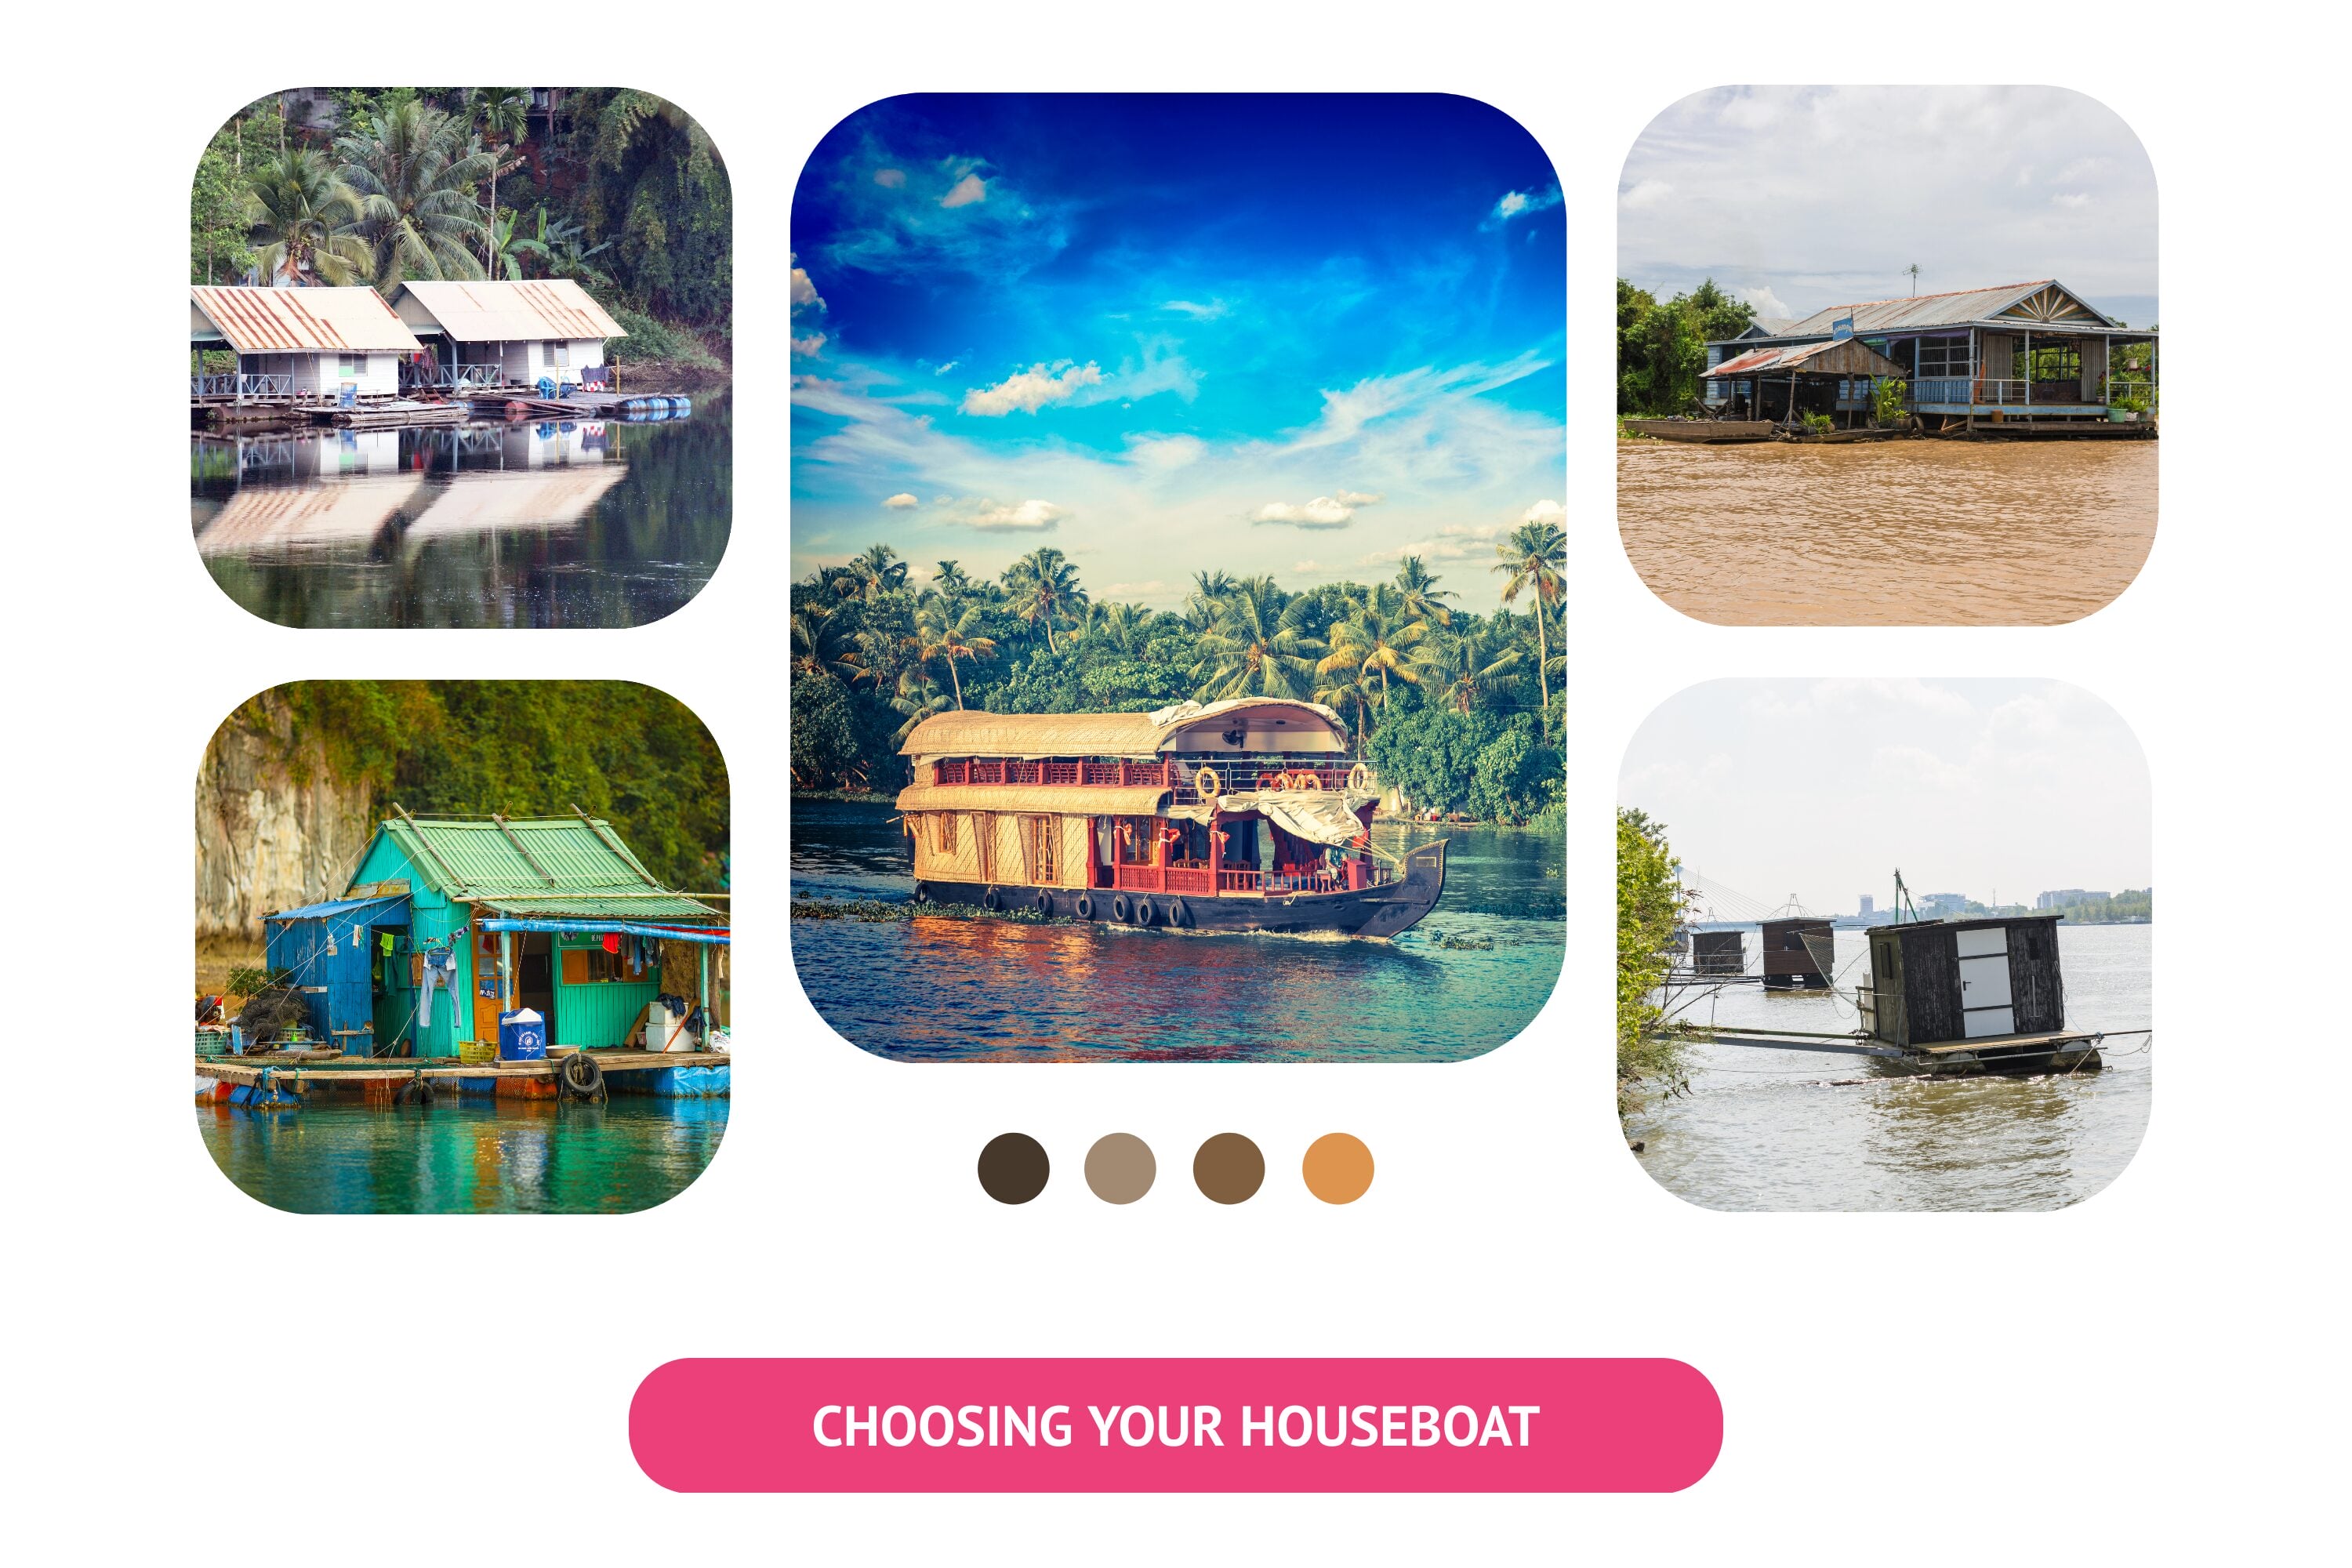 Finding Your Ideal Houseboat